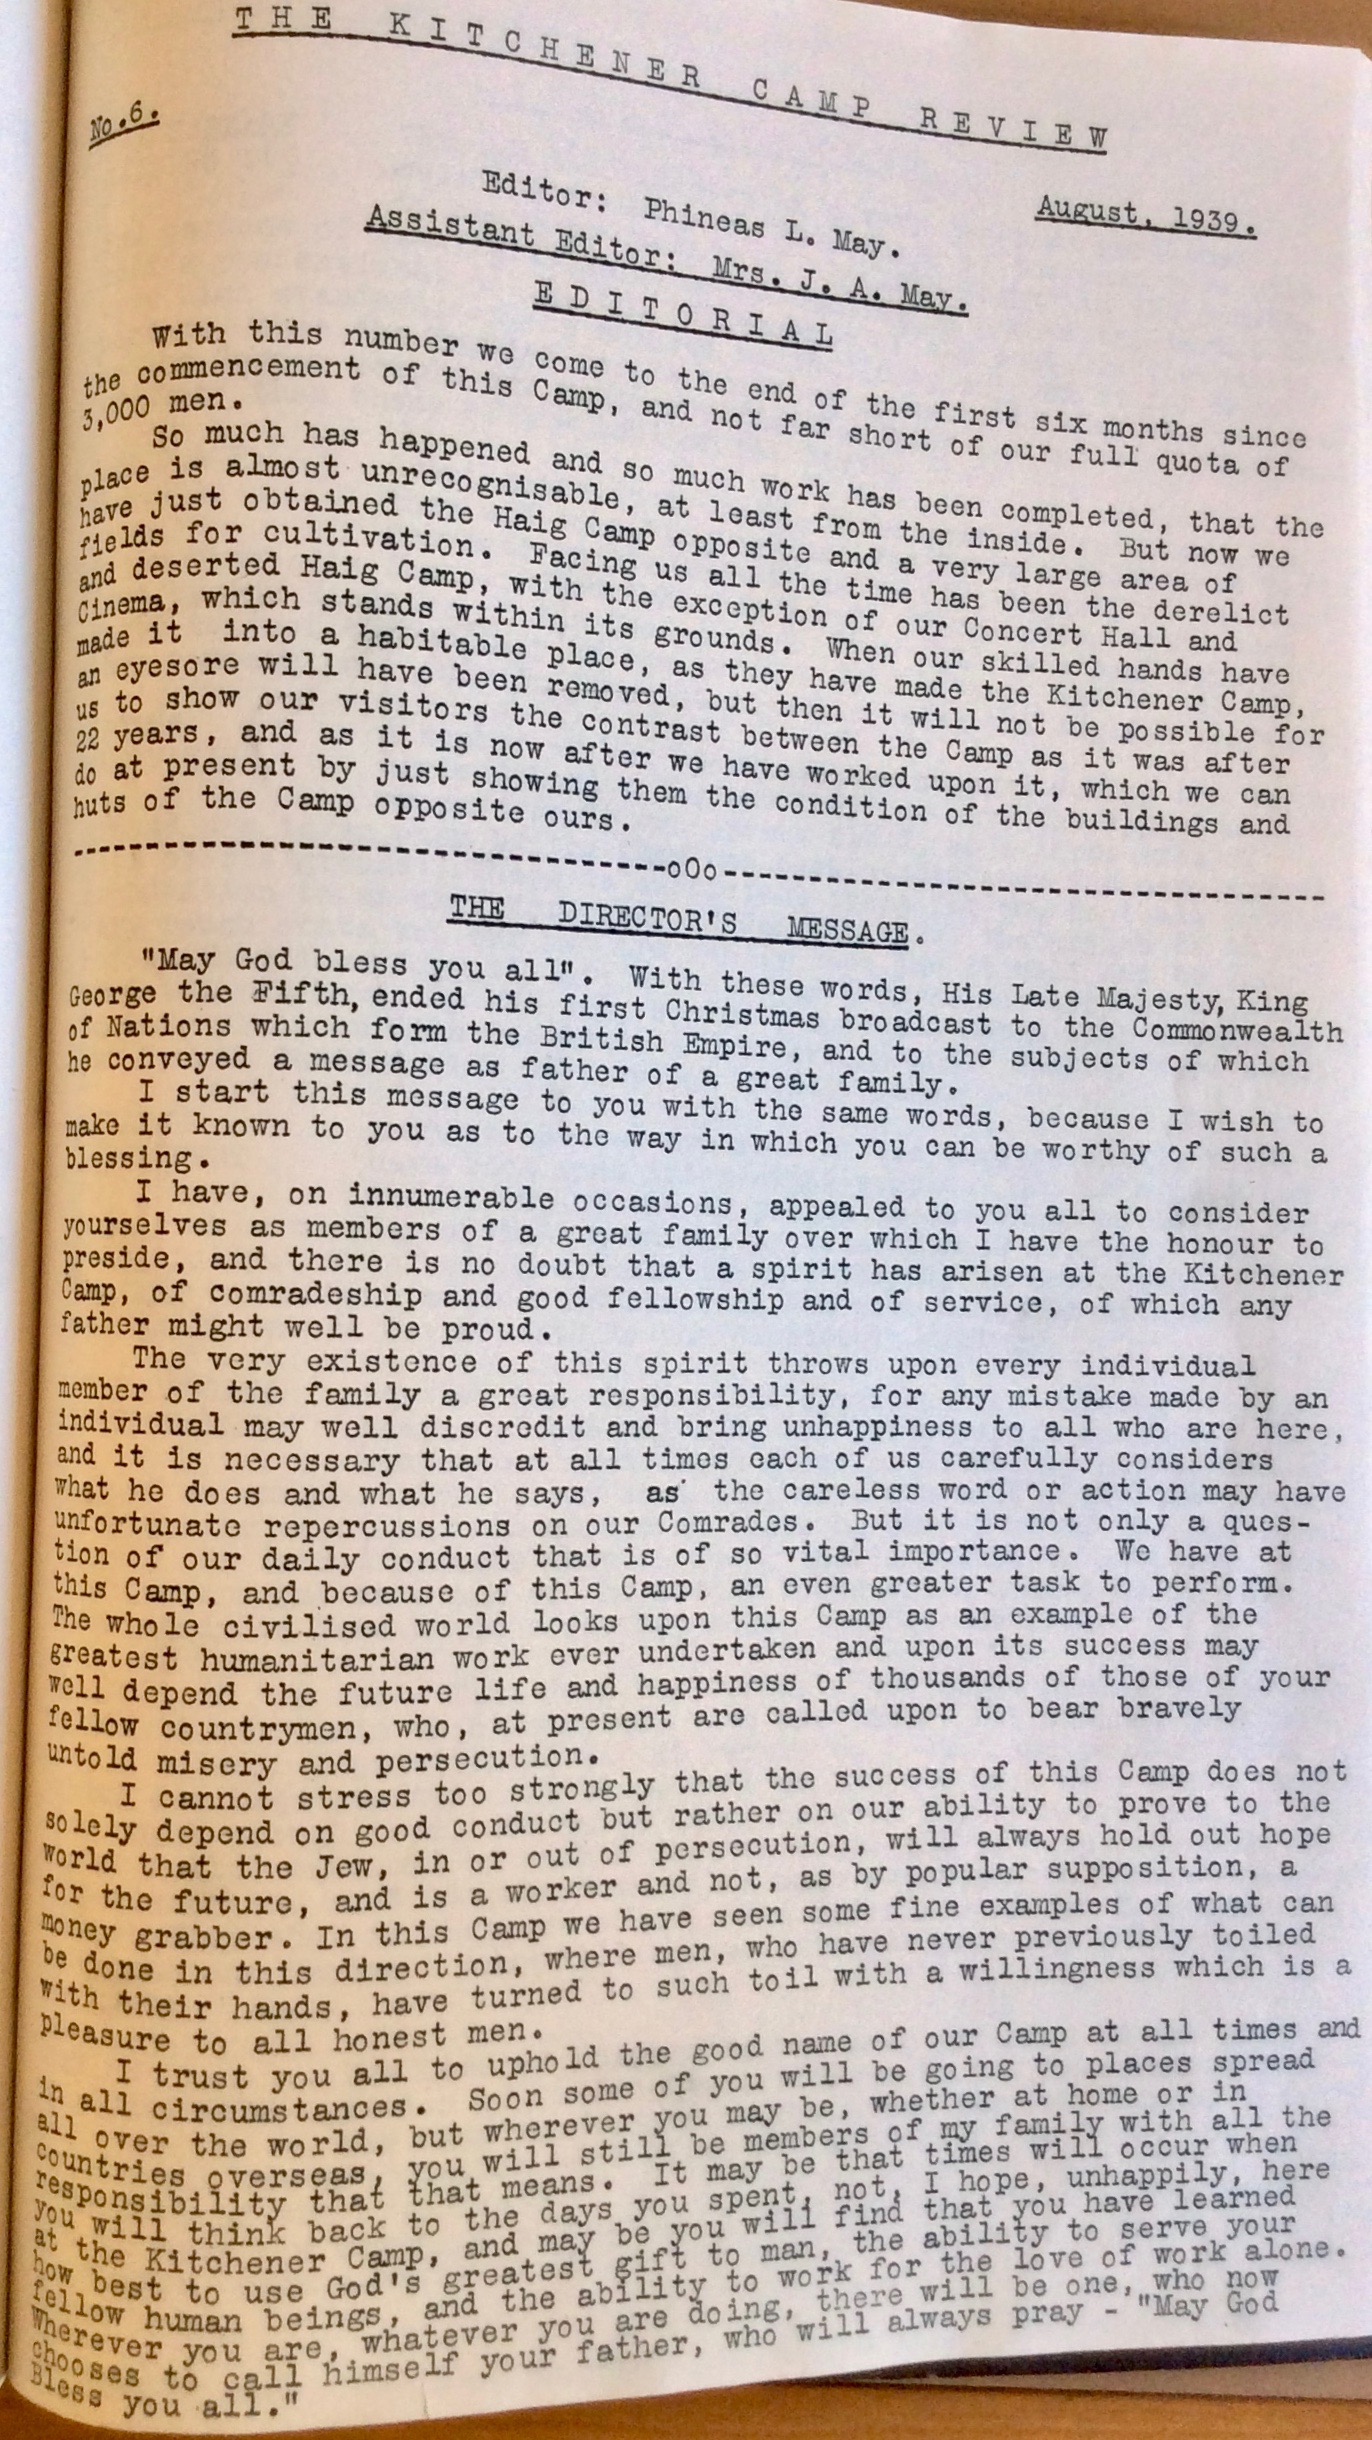 The Kitchener Camp Review, August 1939, page 1